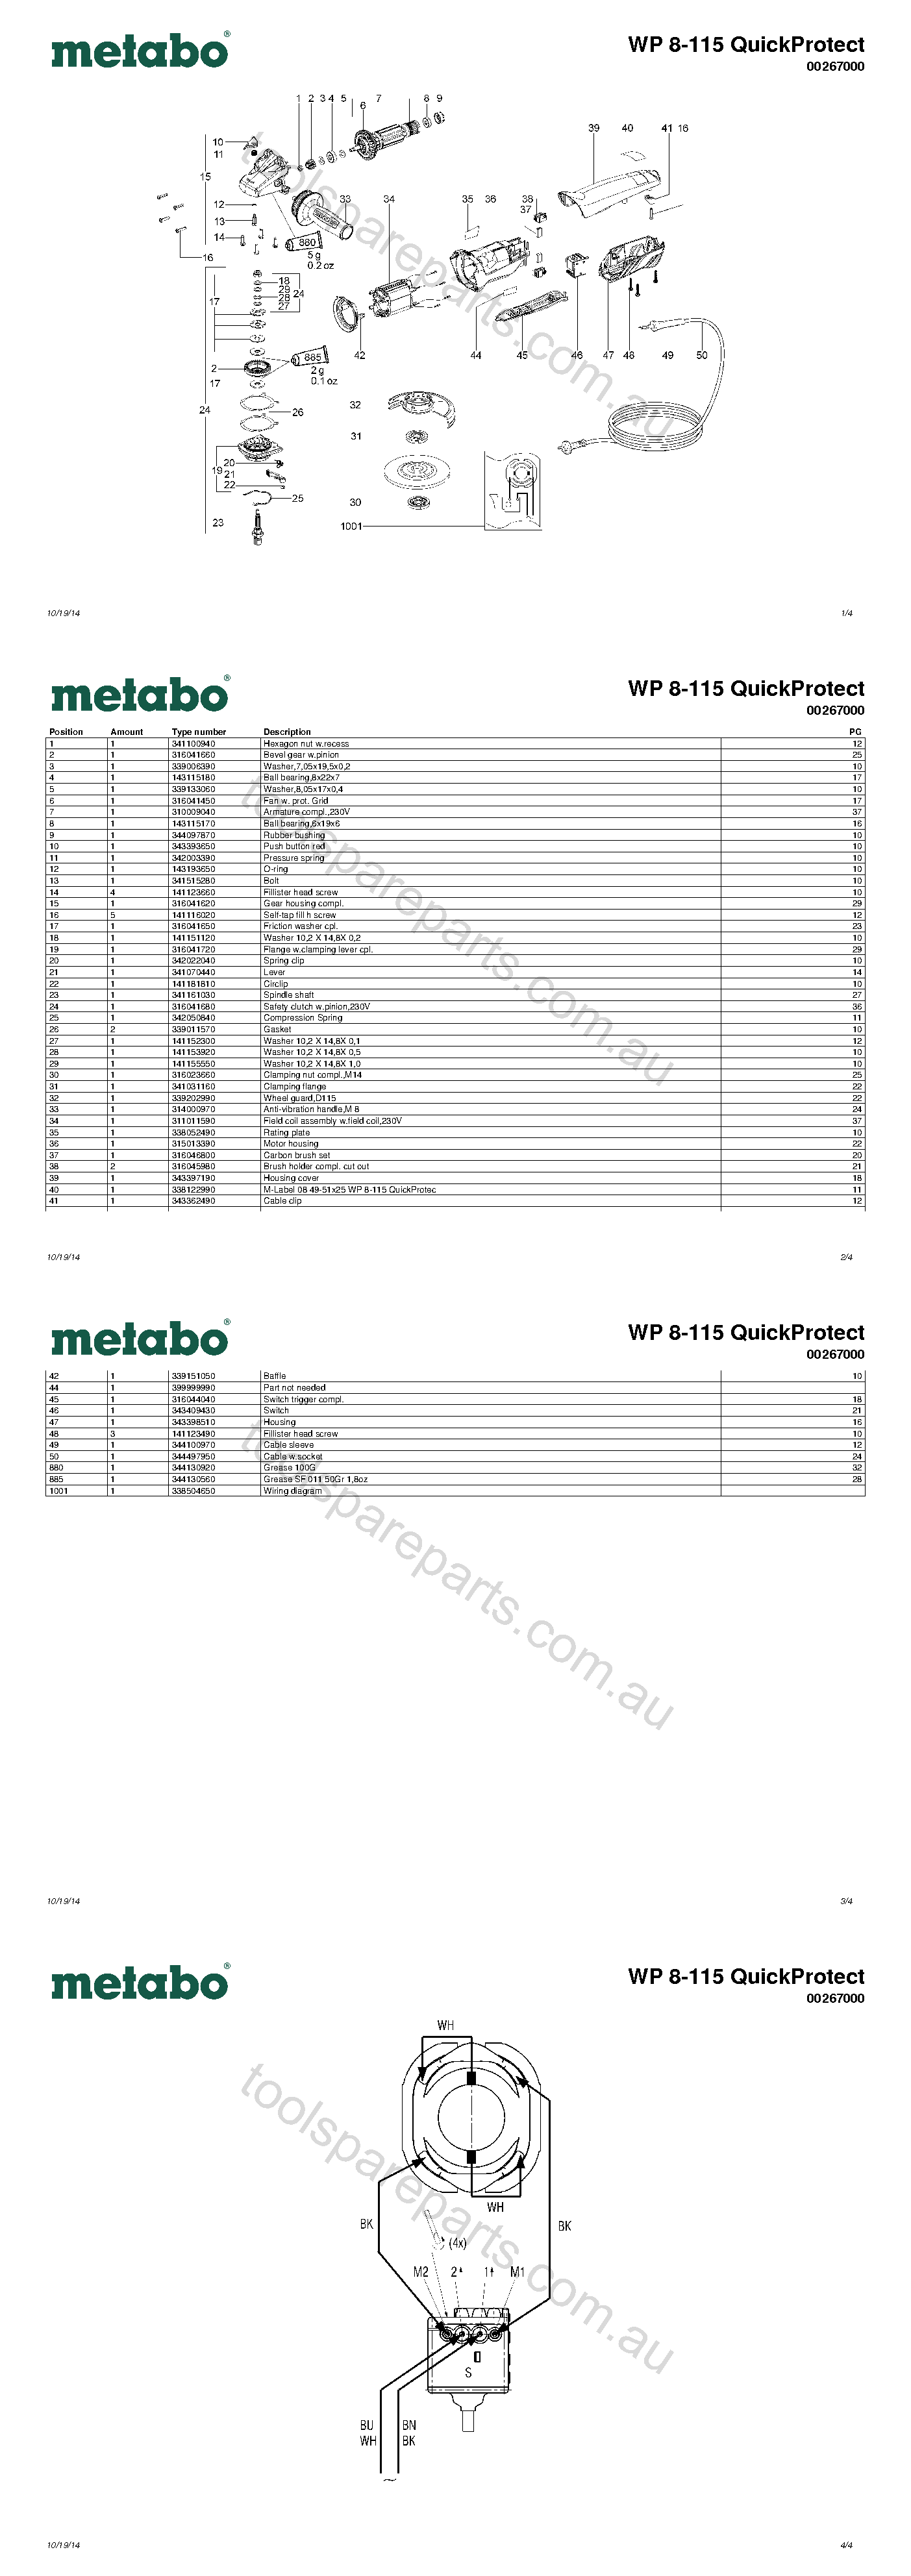 Metabo WP 8-115 QuickProtect 00267000  Diagram 1